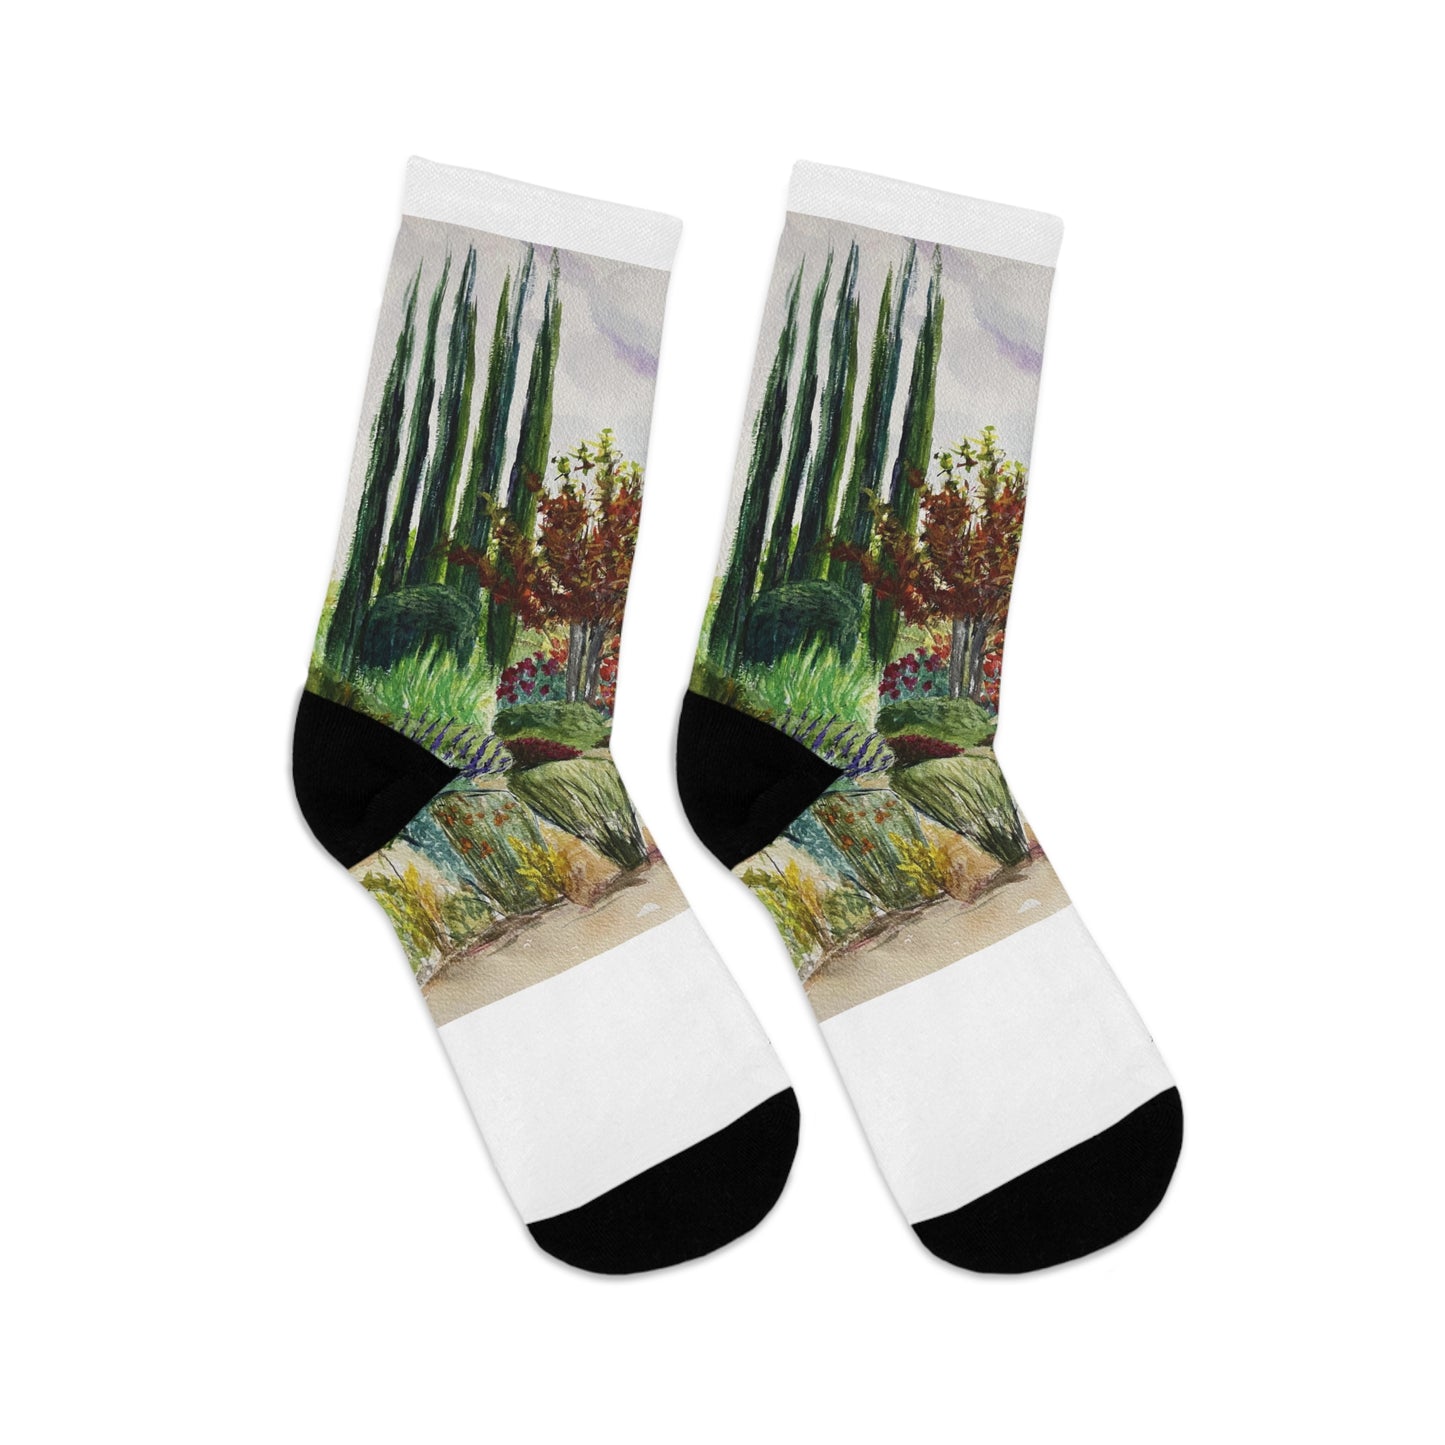 Hill to the Barrel Room GBV Socks